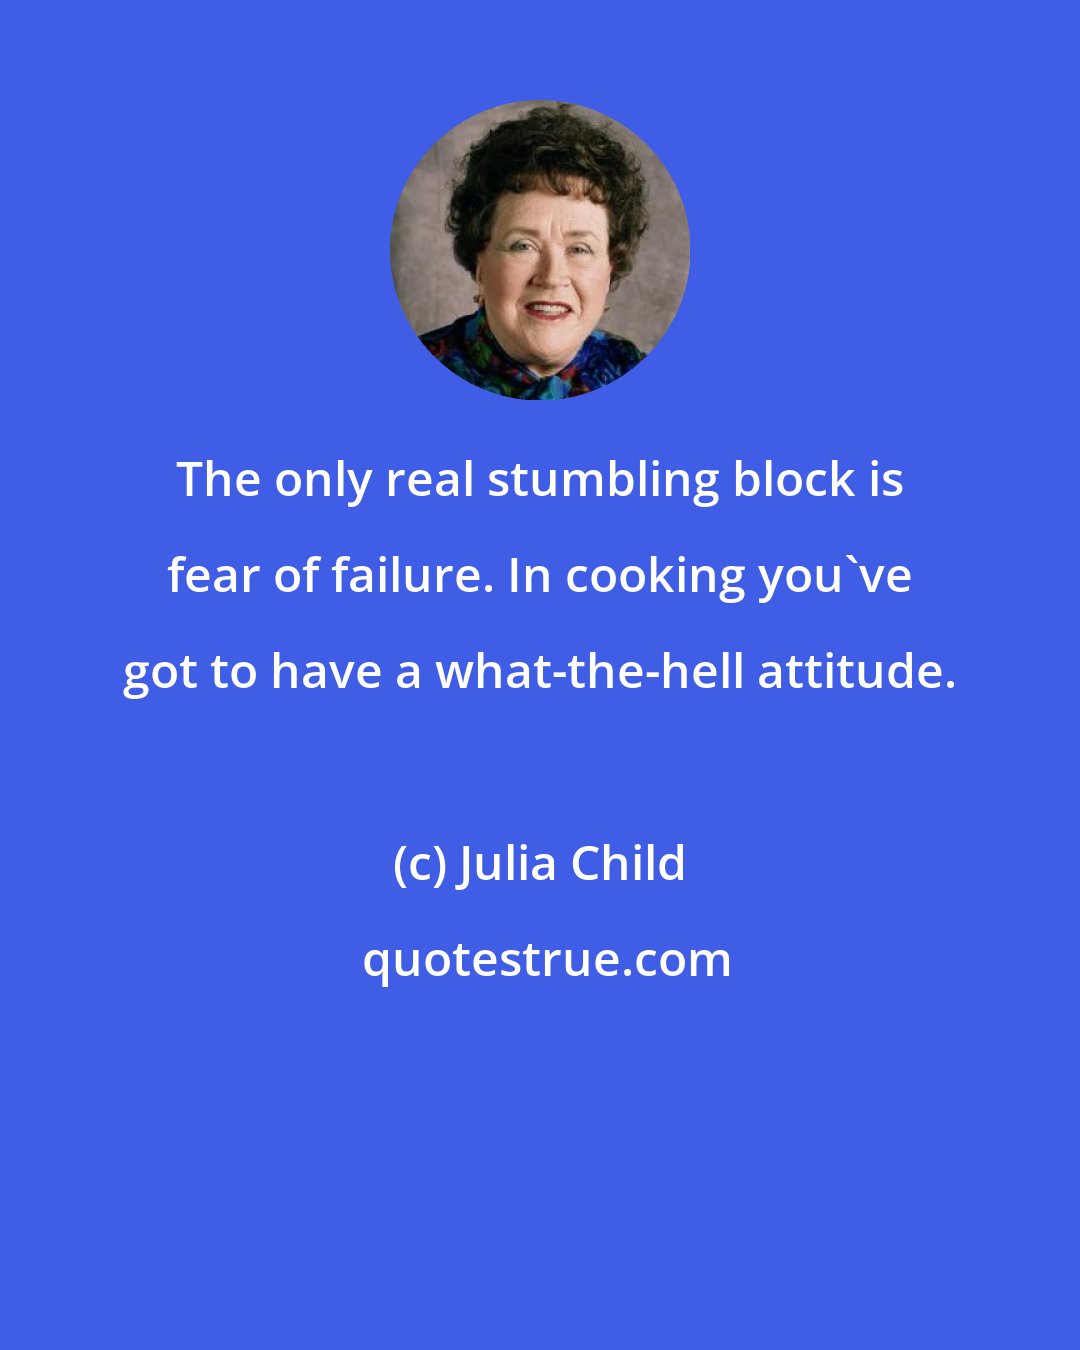 Julia Child: The only real stumbling block is fear of failure. In cooking you've got to have a what-the-hell attitude.